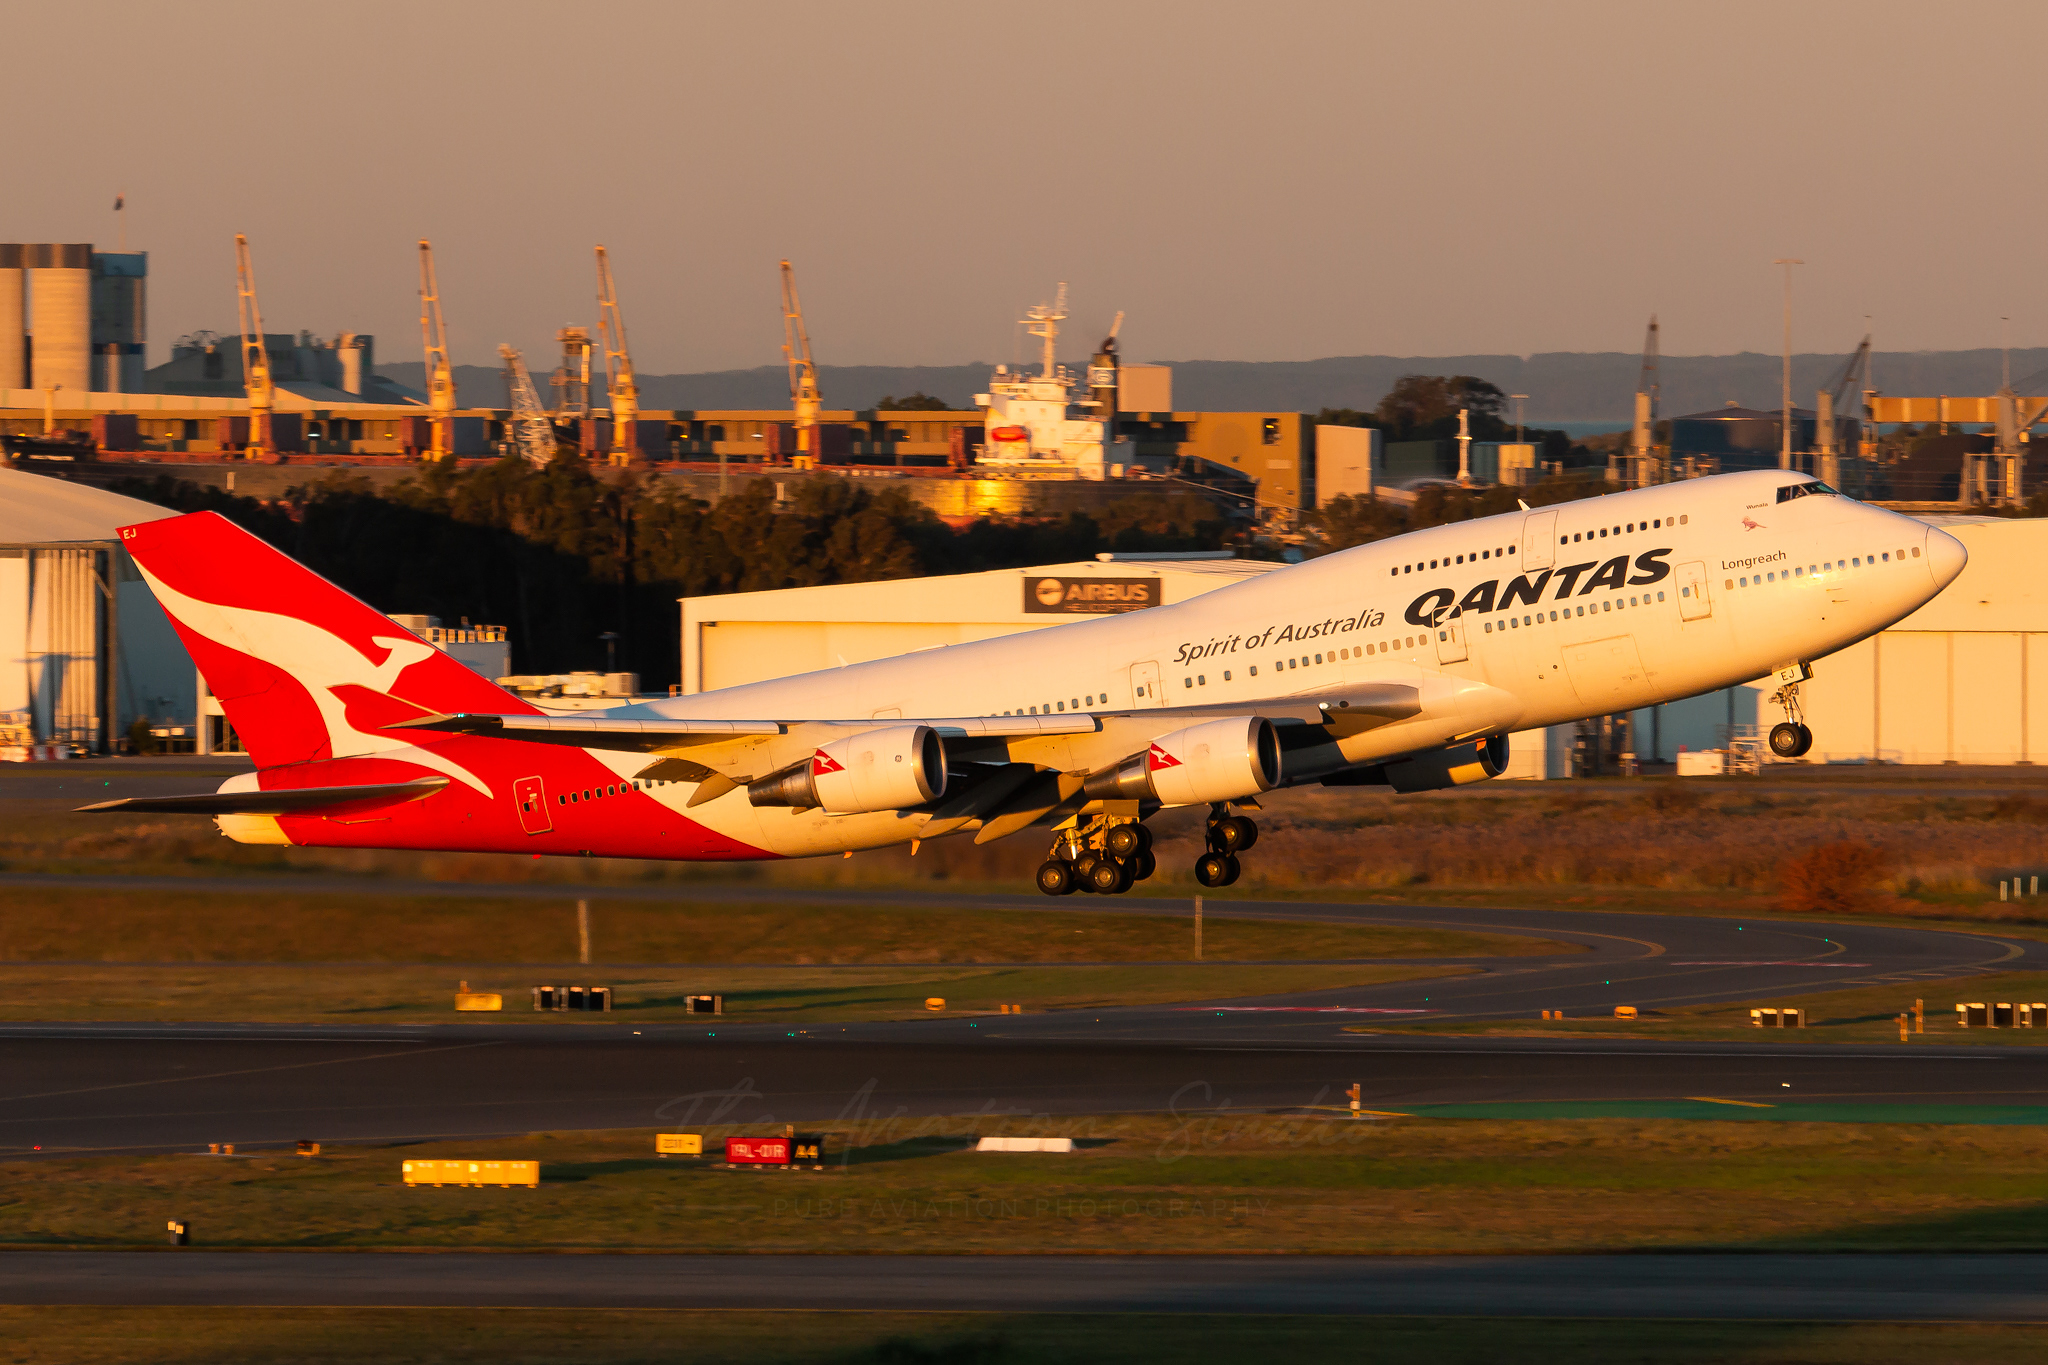 One of Qantas' most iconic aircraft, the Boeing 747, departs Brisbane